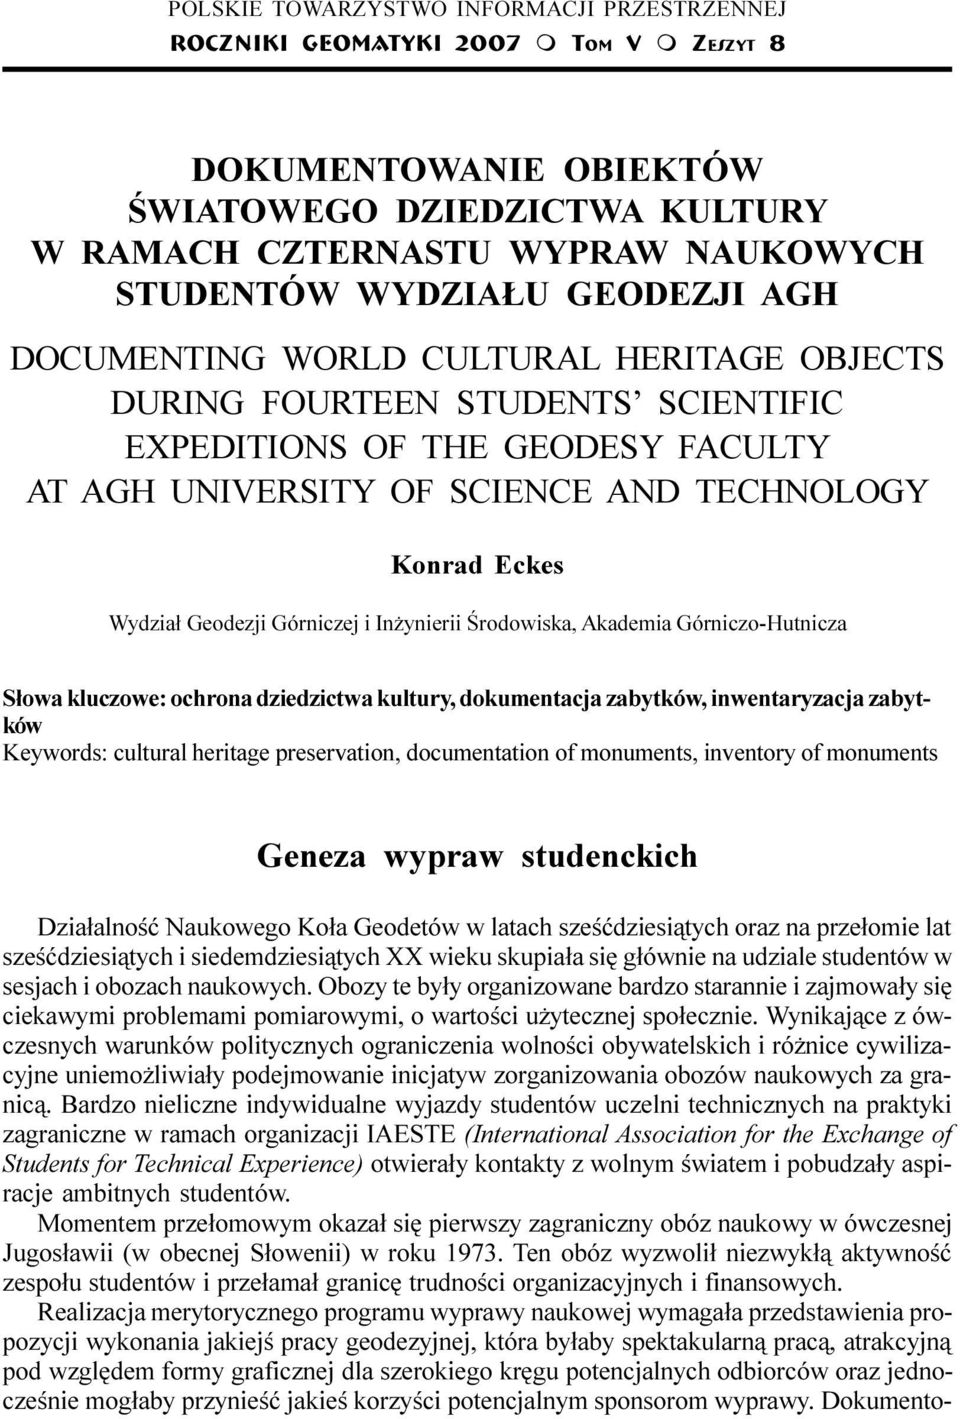 CULTURAL HERITAGE OBJECTS DURING FOURTEEN STUDENTS SCIENTIFIC EXPEDITIONS OF THE GEODESY FACULTY AT AGH UNIVERSITY OF SCIENCE AND TECHNOLOGY Konrad Eckes Wydzia³ Geodezji Górniczej i In ynierii